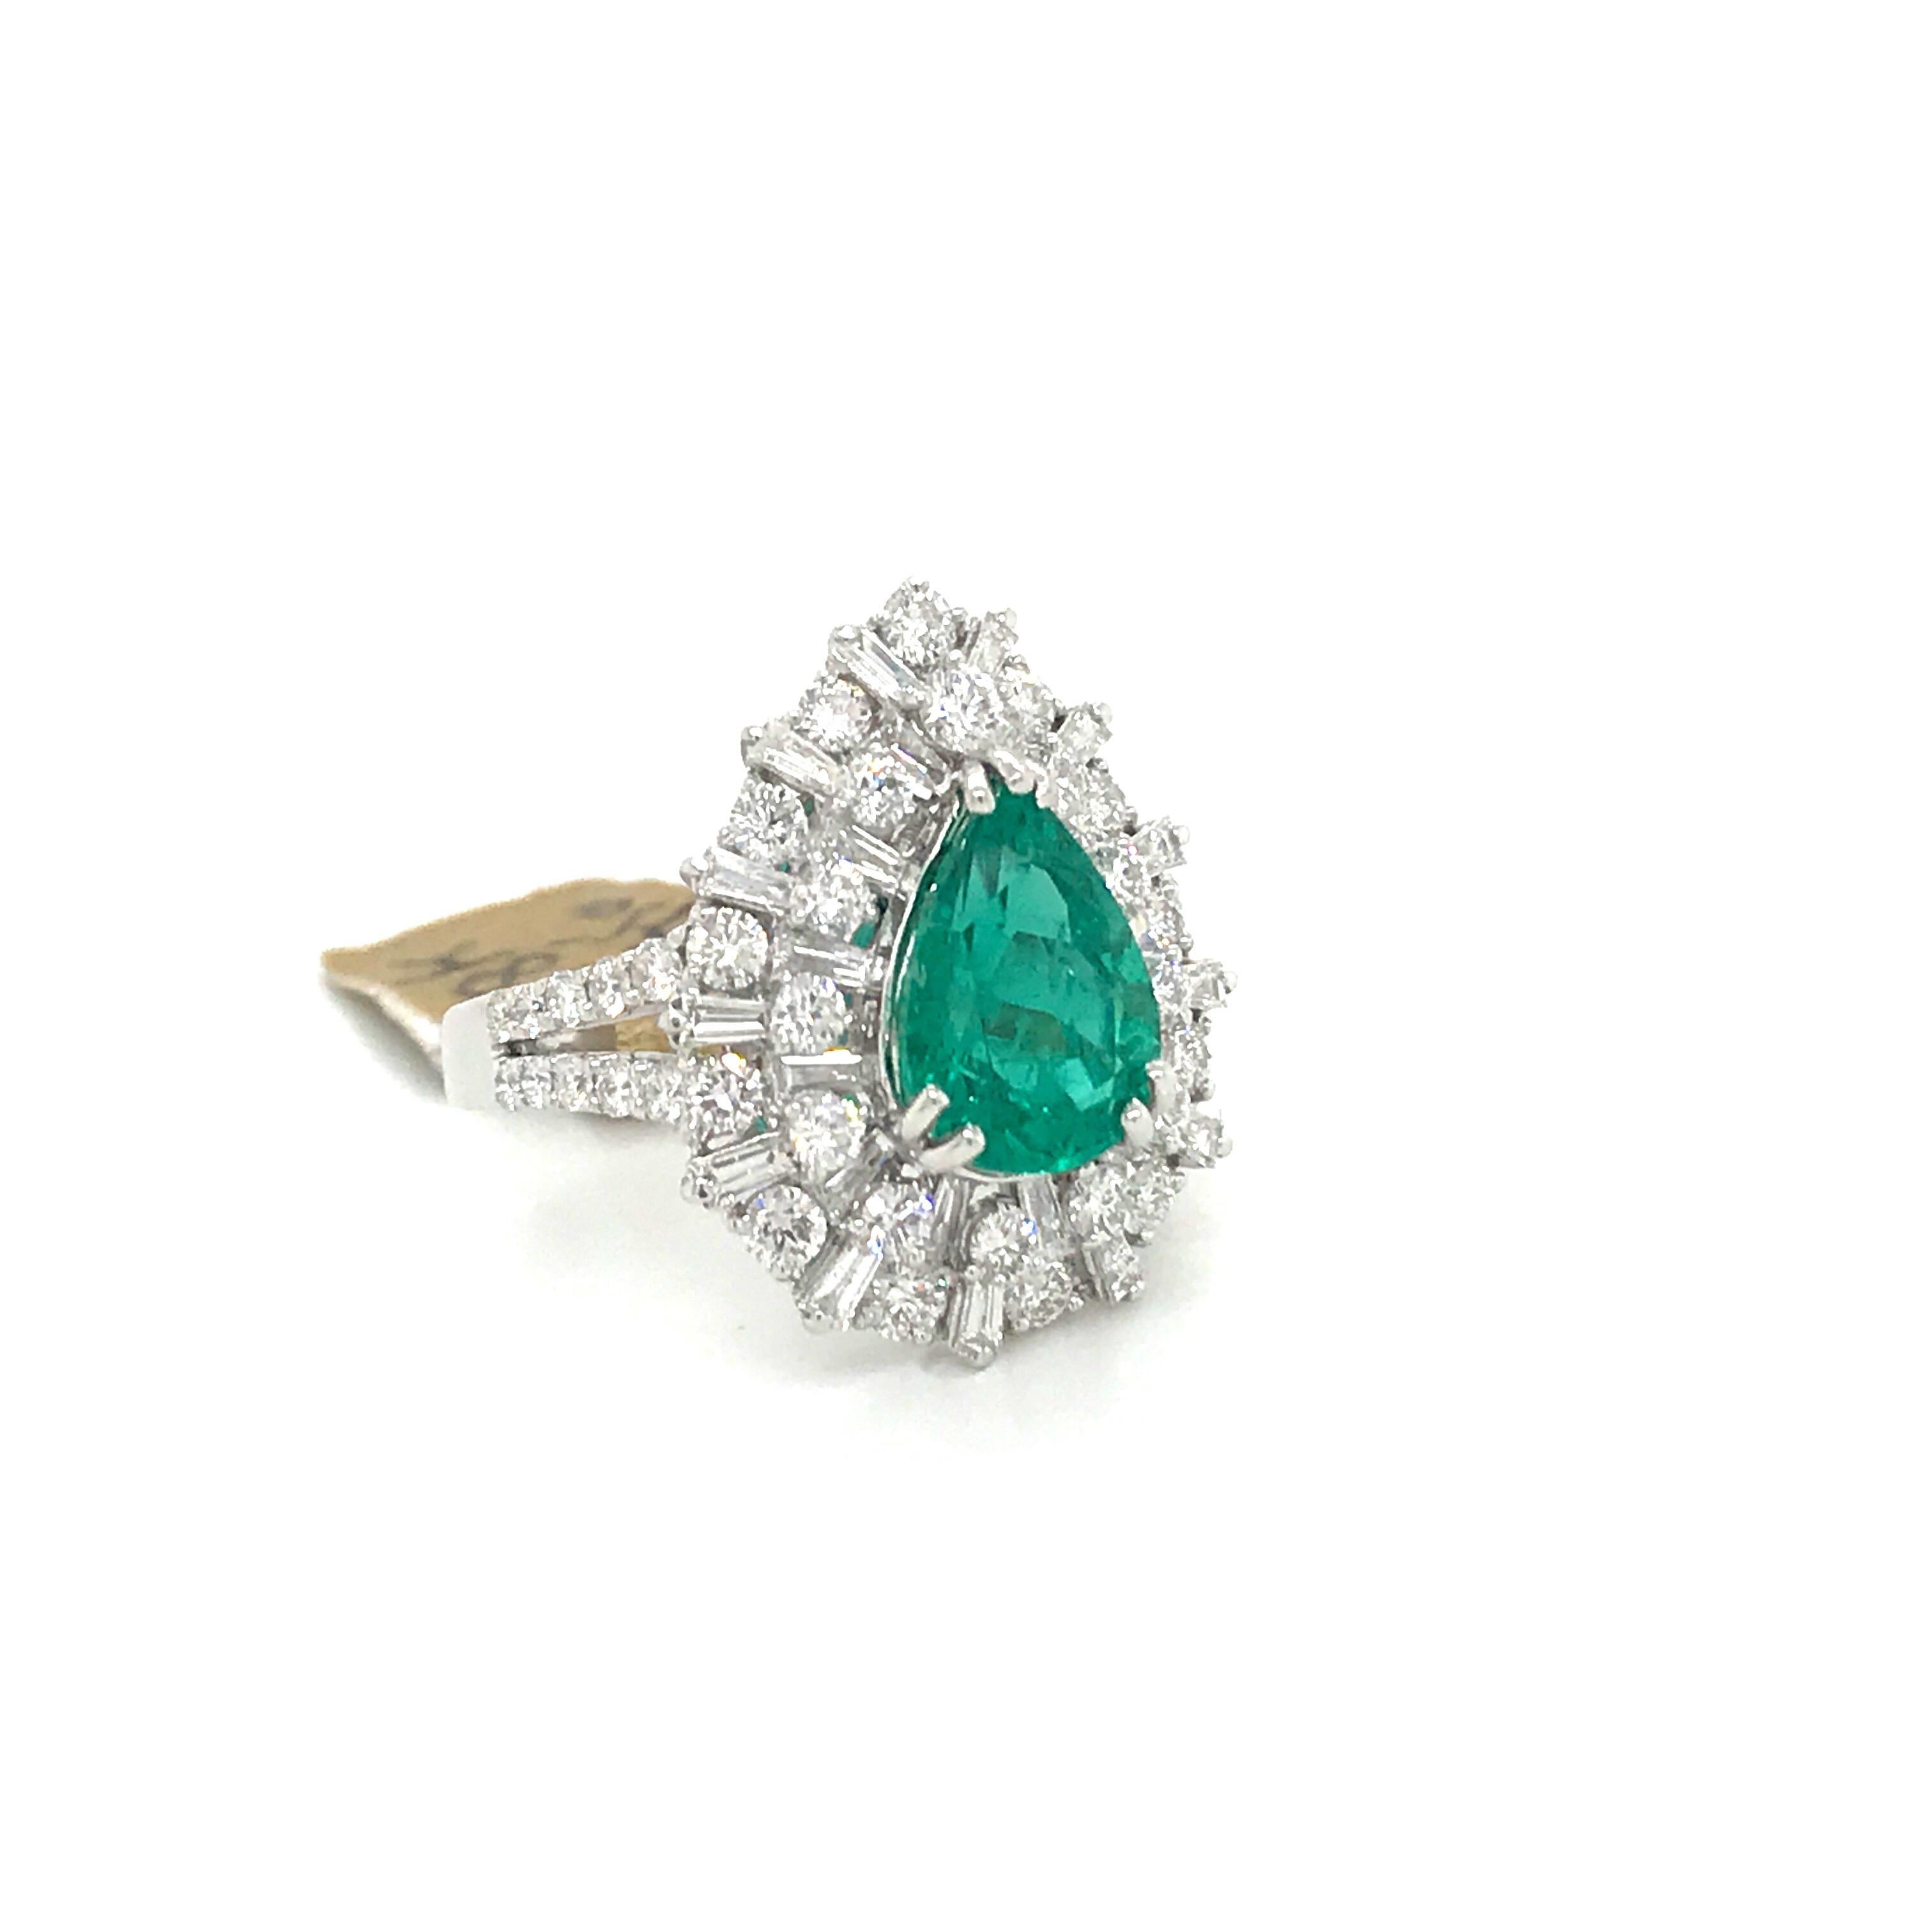 18K White gold cocktail ring featuring one pear shape emerald weighing 2.65 carats flanked with baguette and round brilliants weighing 2.00 carats.
Origin: Brazilian
Not Treated 
Color G
Clarity VS-SI